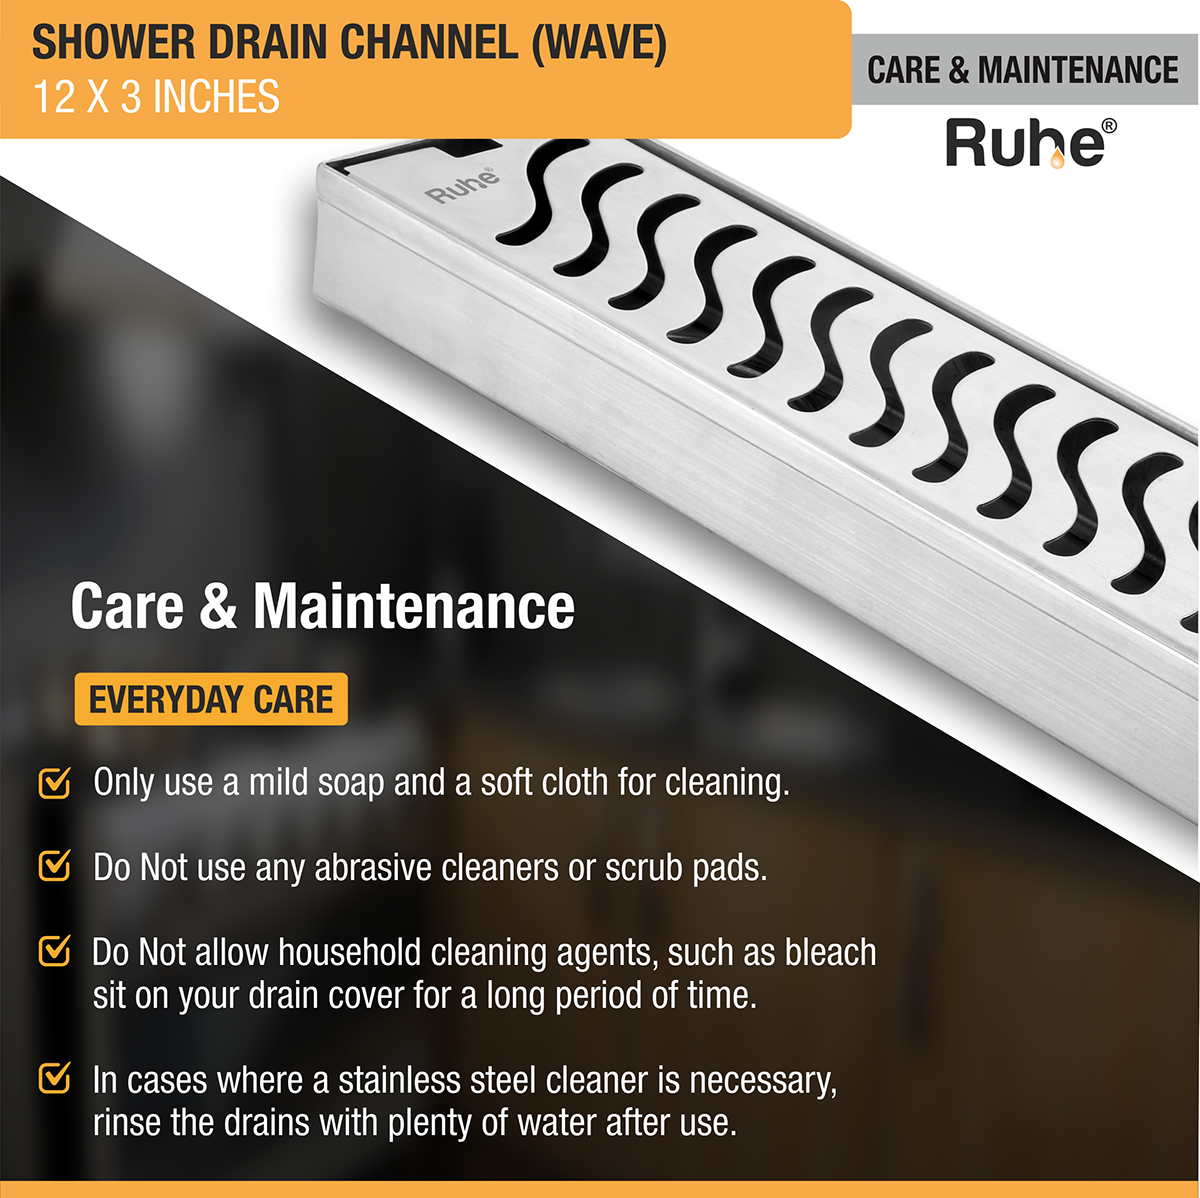 Wave Shower Drain Channel (12 X 3 Inches) with Cockroach Trap (304 Grade) care and maintenance